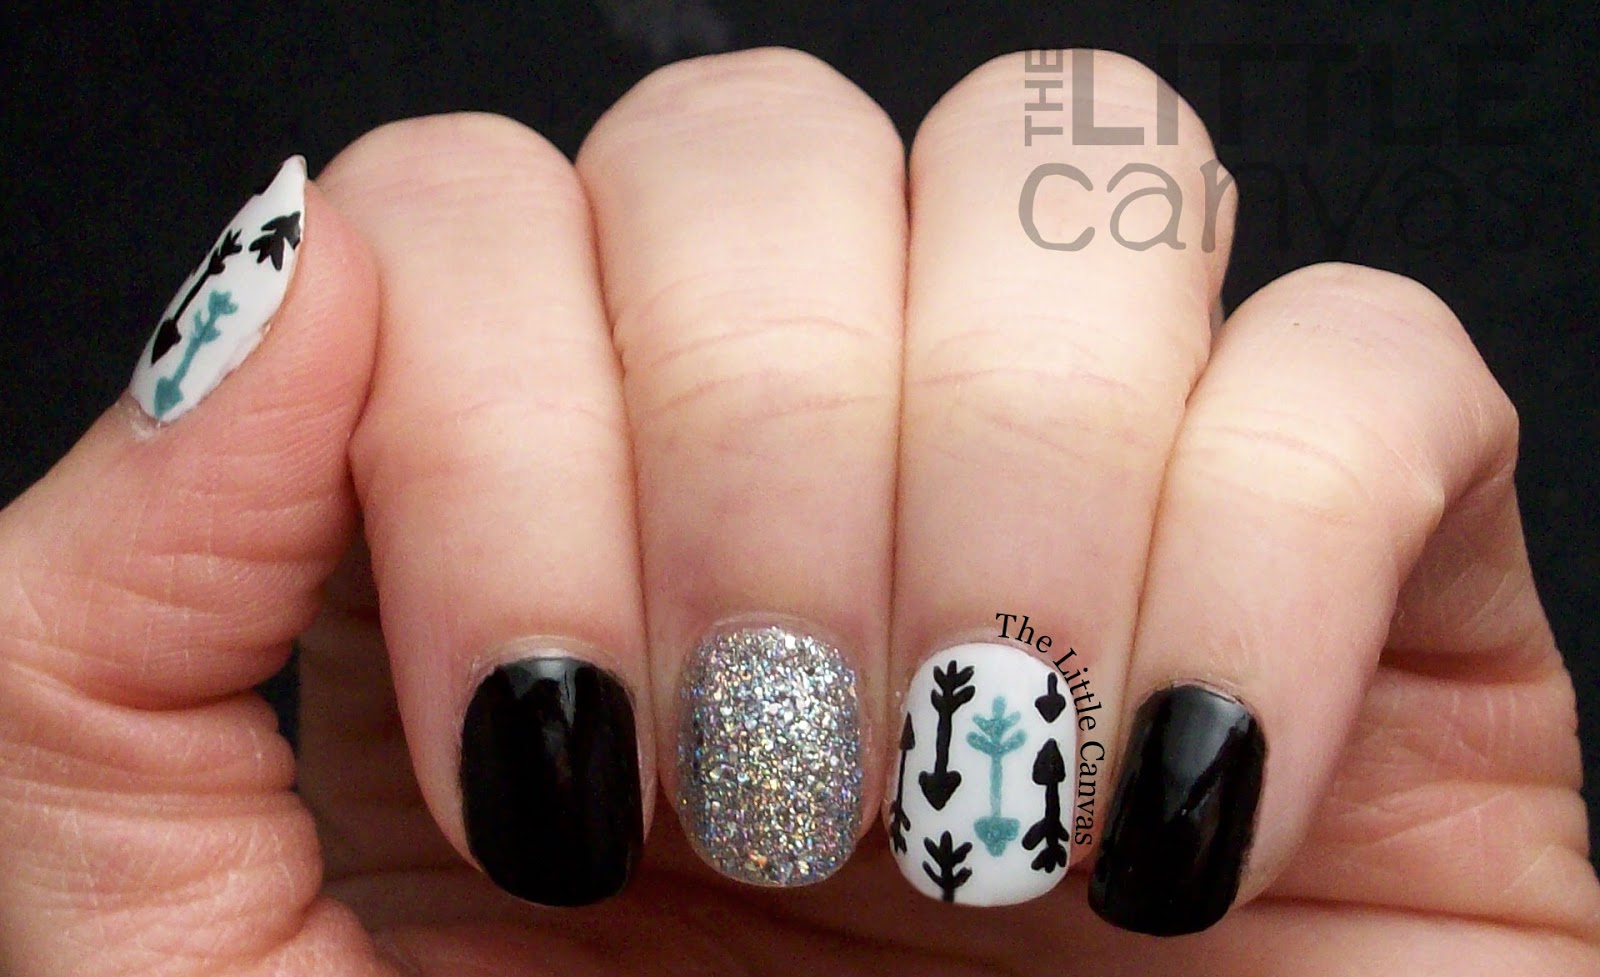 2. Bow and Arrow Nail Designs - wide 4